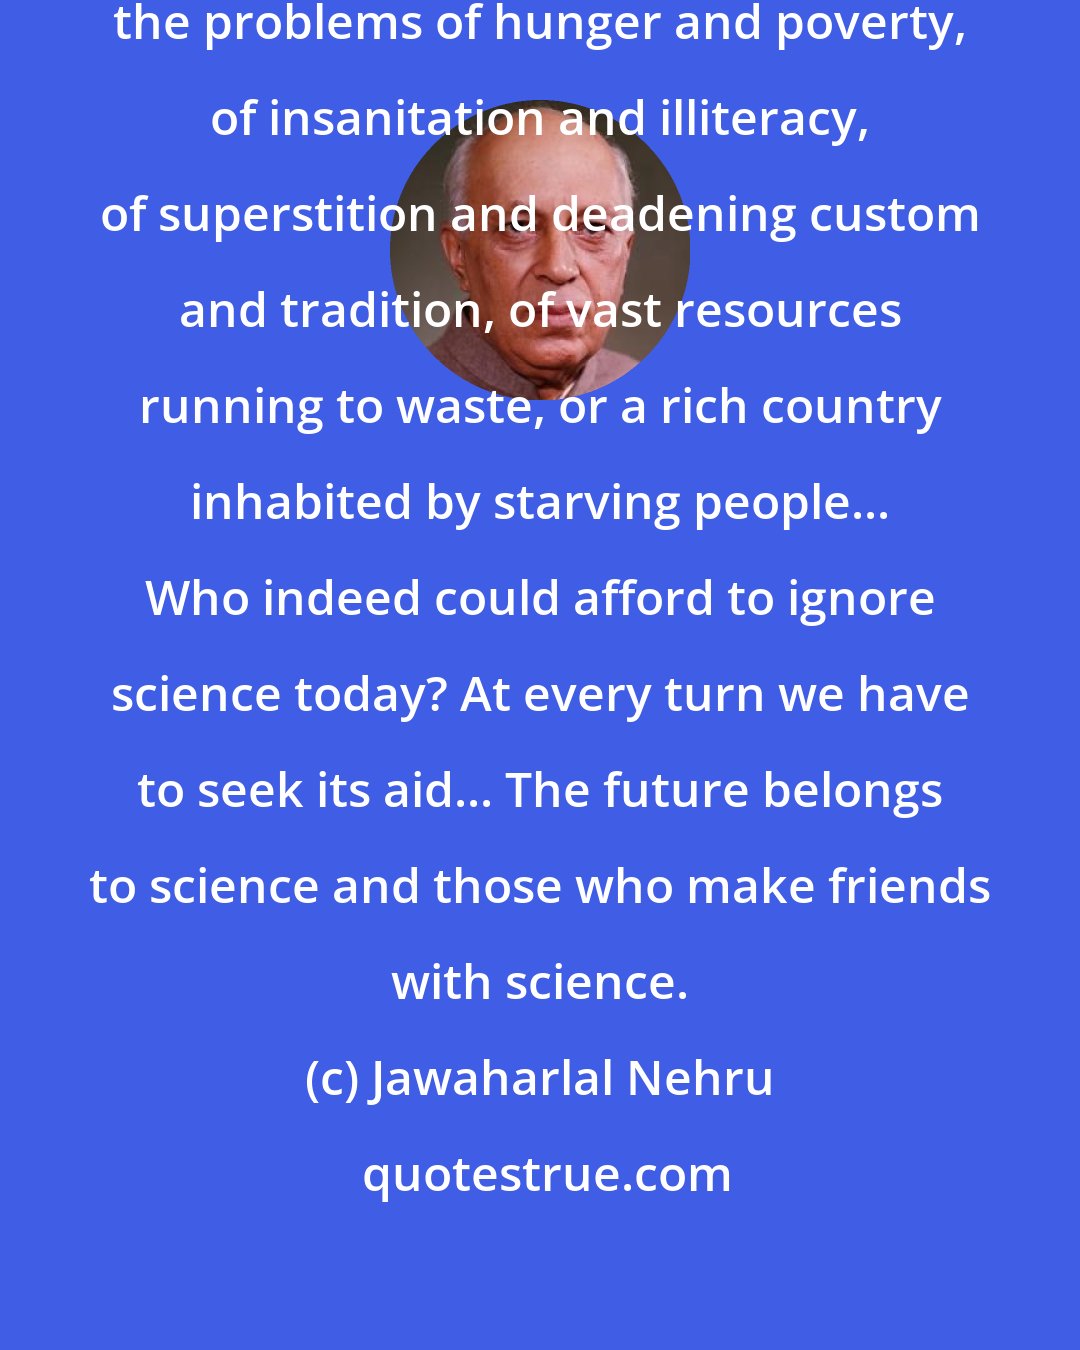 Jawaharlal Nehru: It is science alone that can solve the problems of hunger and poverty, of insanitation and illiteracy, of superstition and deadening custom and tradition, of vast resources running to waste, or a rich country inhabited by starving people... Who indeed could afford to ignore science today? At every turn we have to seek its aid... The future belongs to science and those who make friends with science.